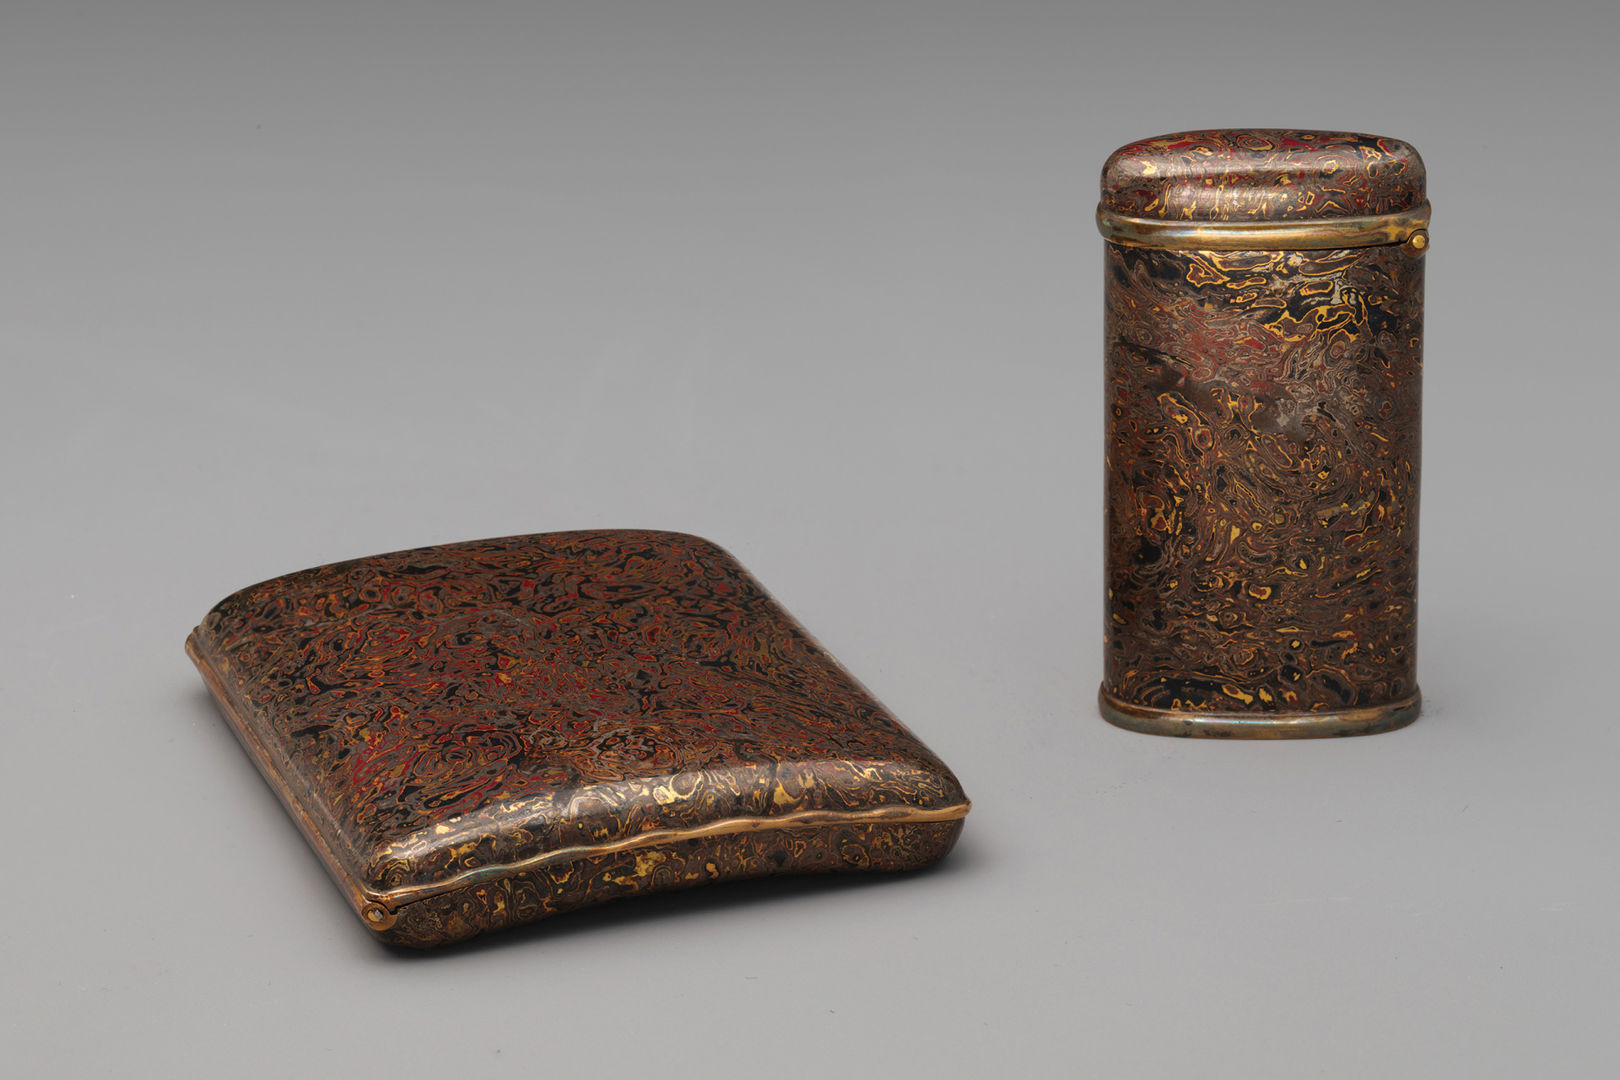 A flat cigarette case and an upright tall match case in a matching wood grain pattern rendered in deep red, black, brown, and gold metals.